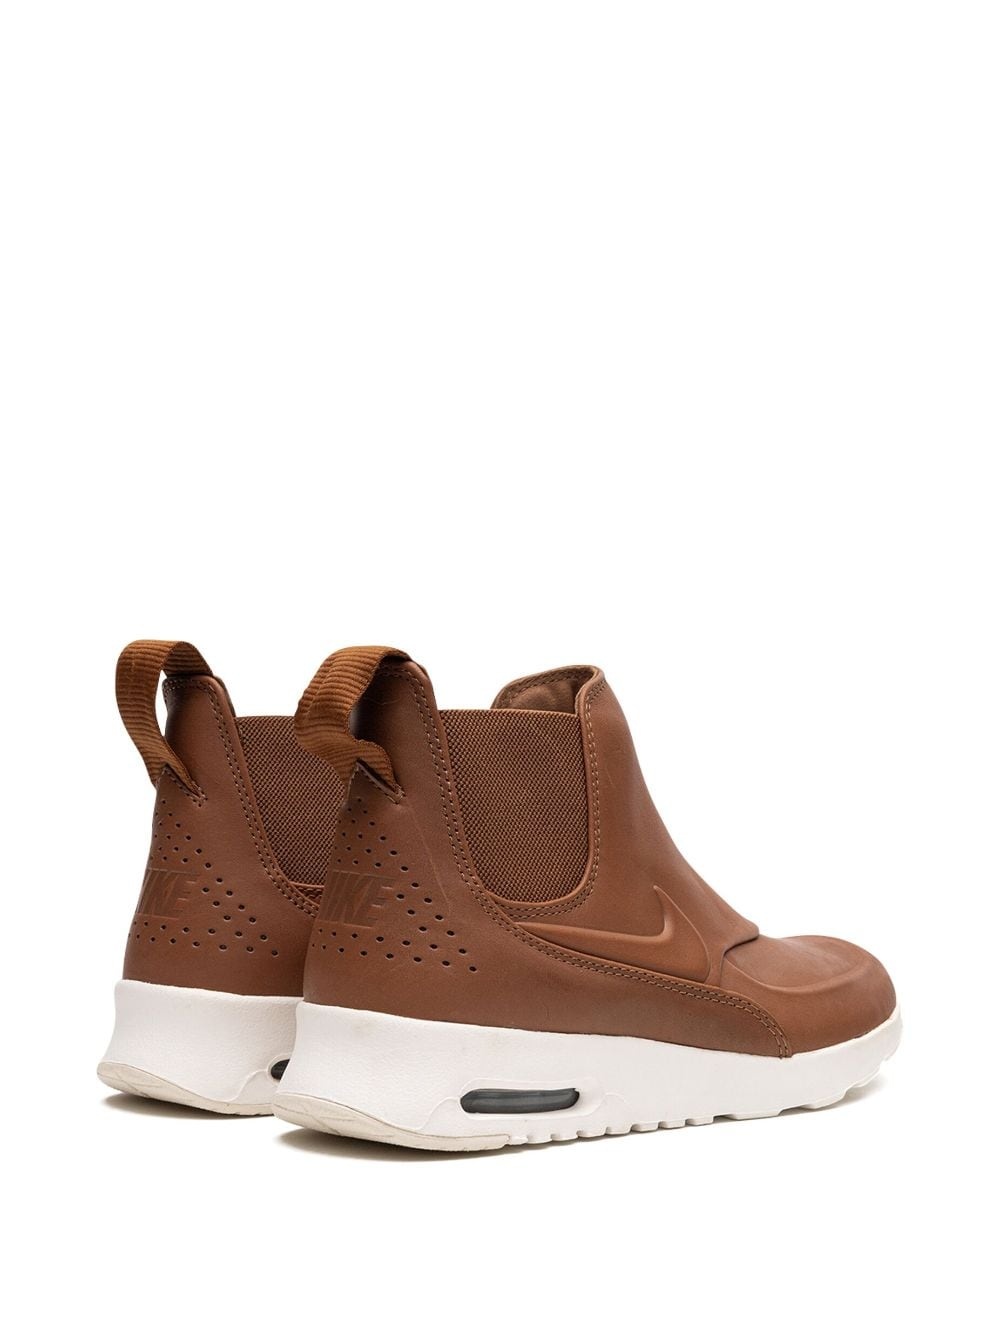 Air Max Thea Mid "Ale Brown" sneakers - 3